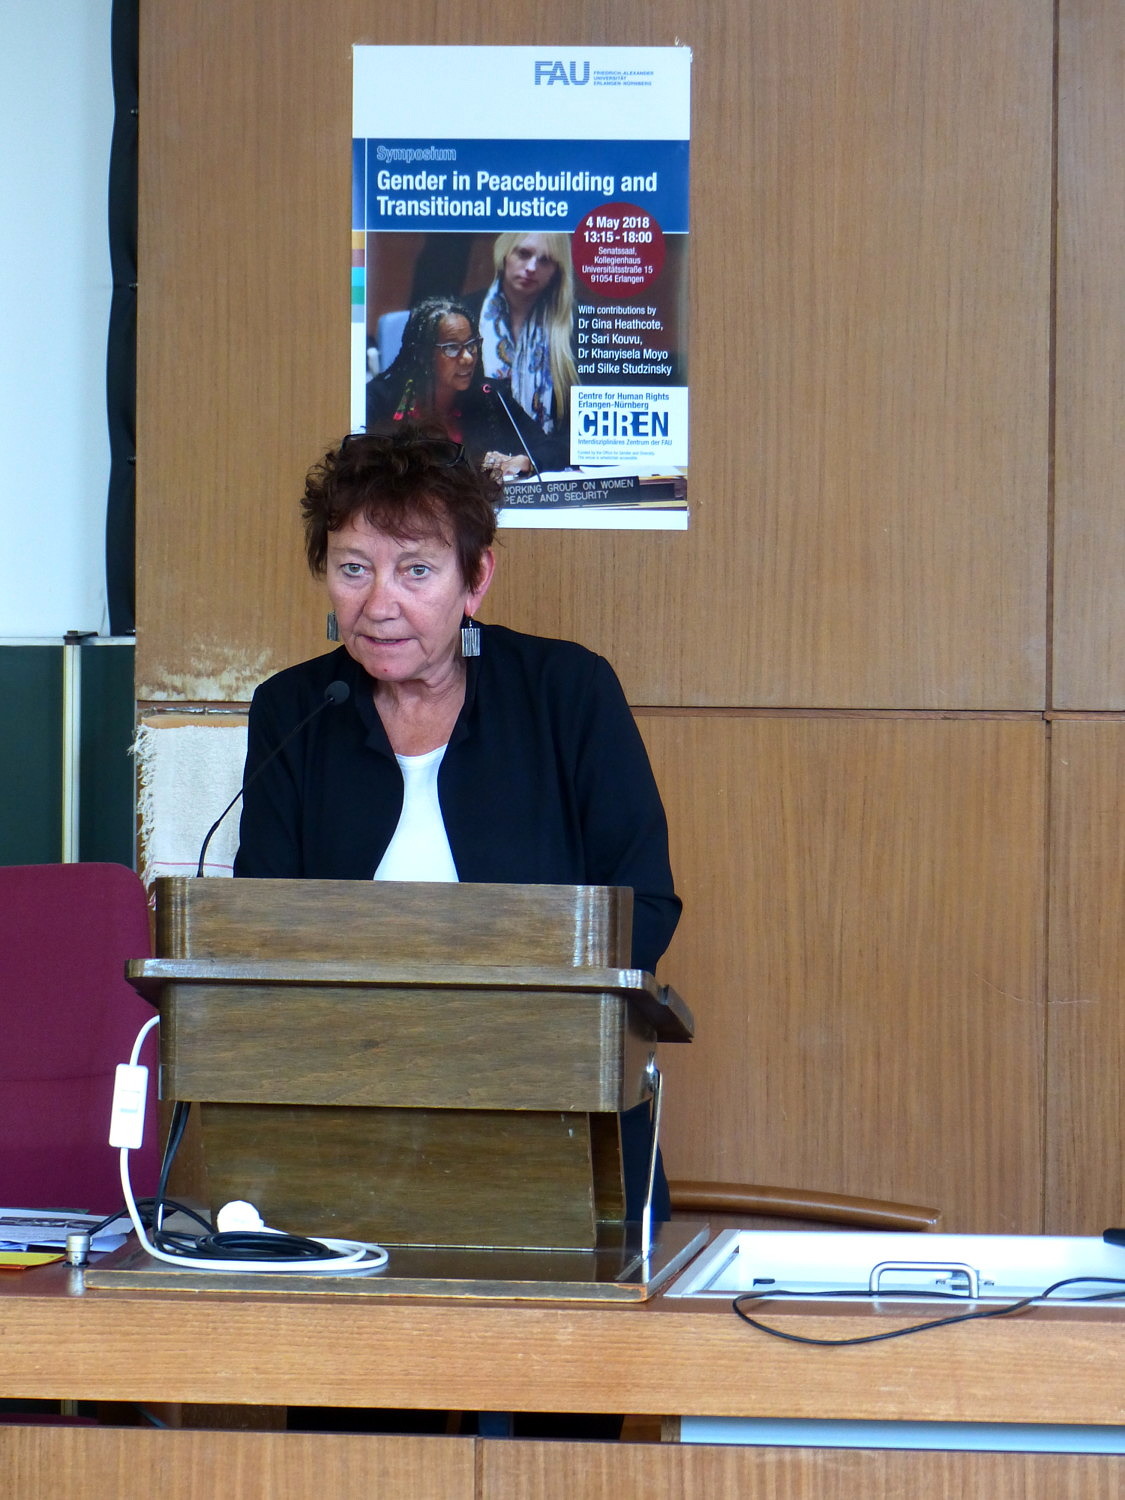 Silke Studzinsky speaks at the Symposium on Gender and Peacebuilding and Transitional Justice